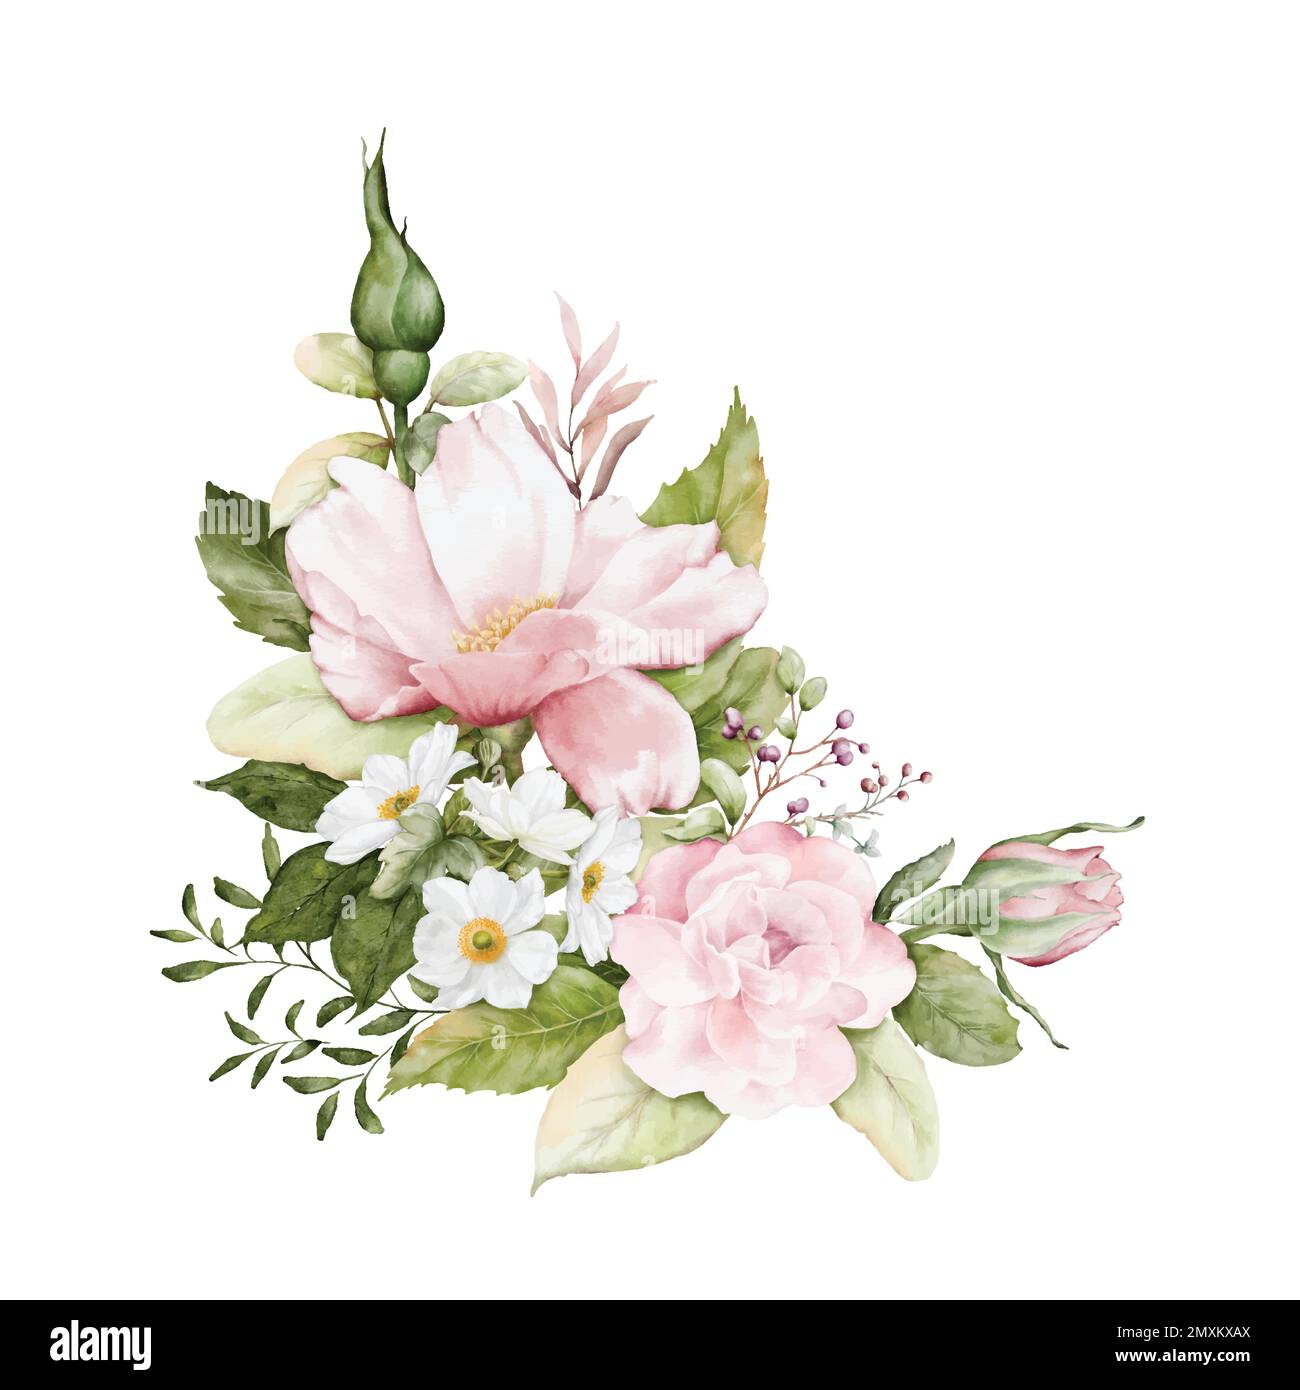 Watercolor arrangements with rose flowers. Bouquets of pink rose, white flowers and leaves composition for wedding, Valentine or greeting cards. Botan Stock Vector